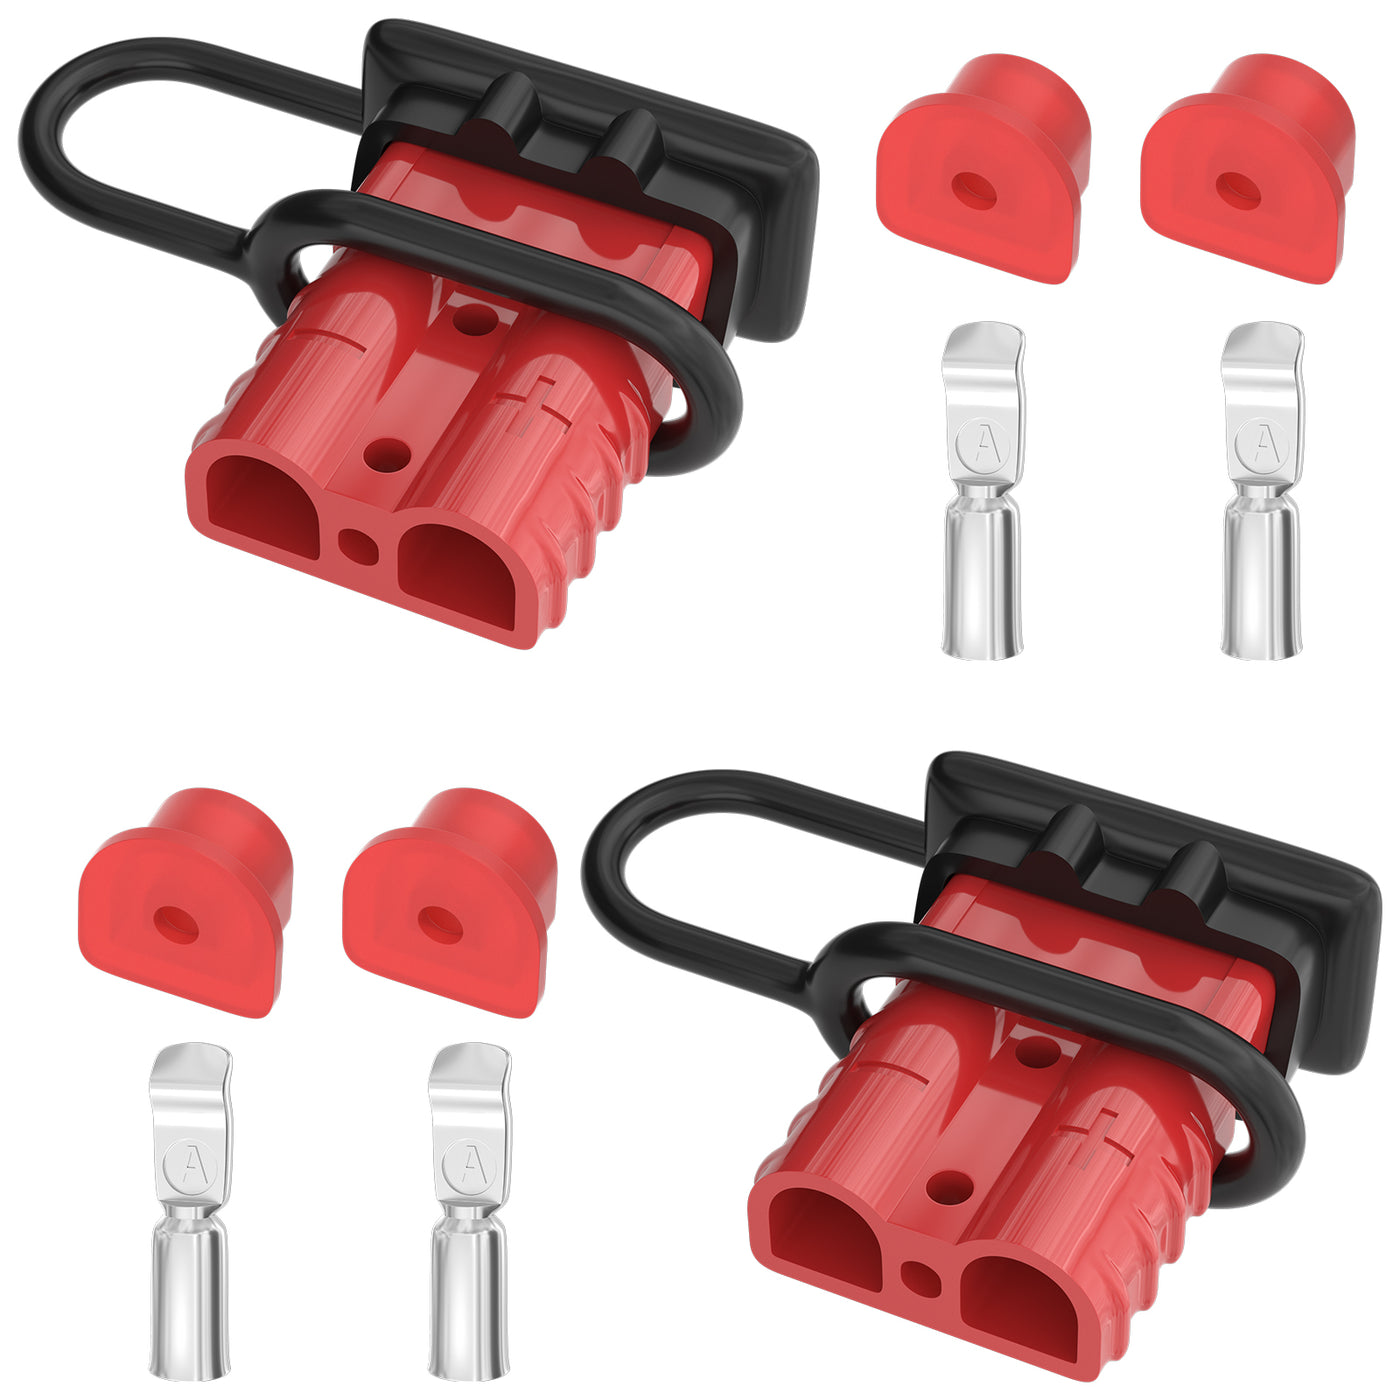 Pair of 50Amp Red Battery Quick Disconnect Connector with Cover - DAIER